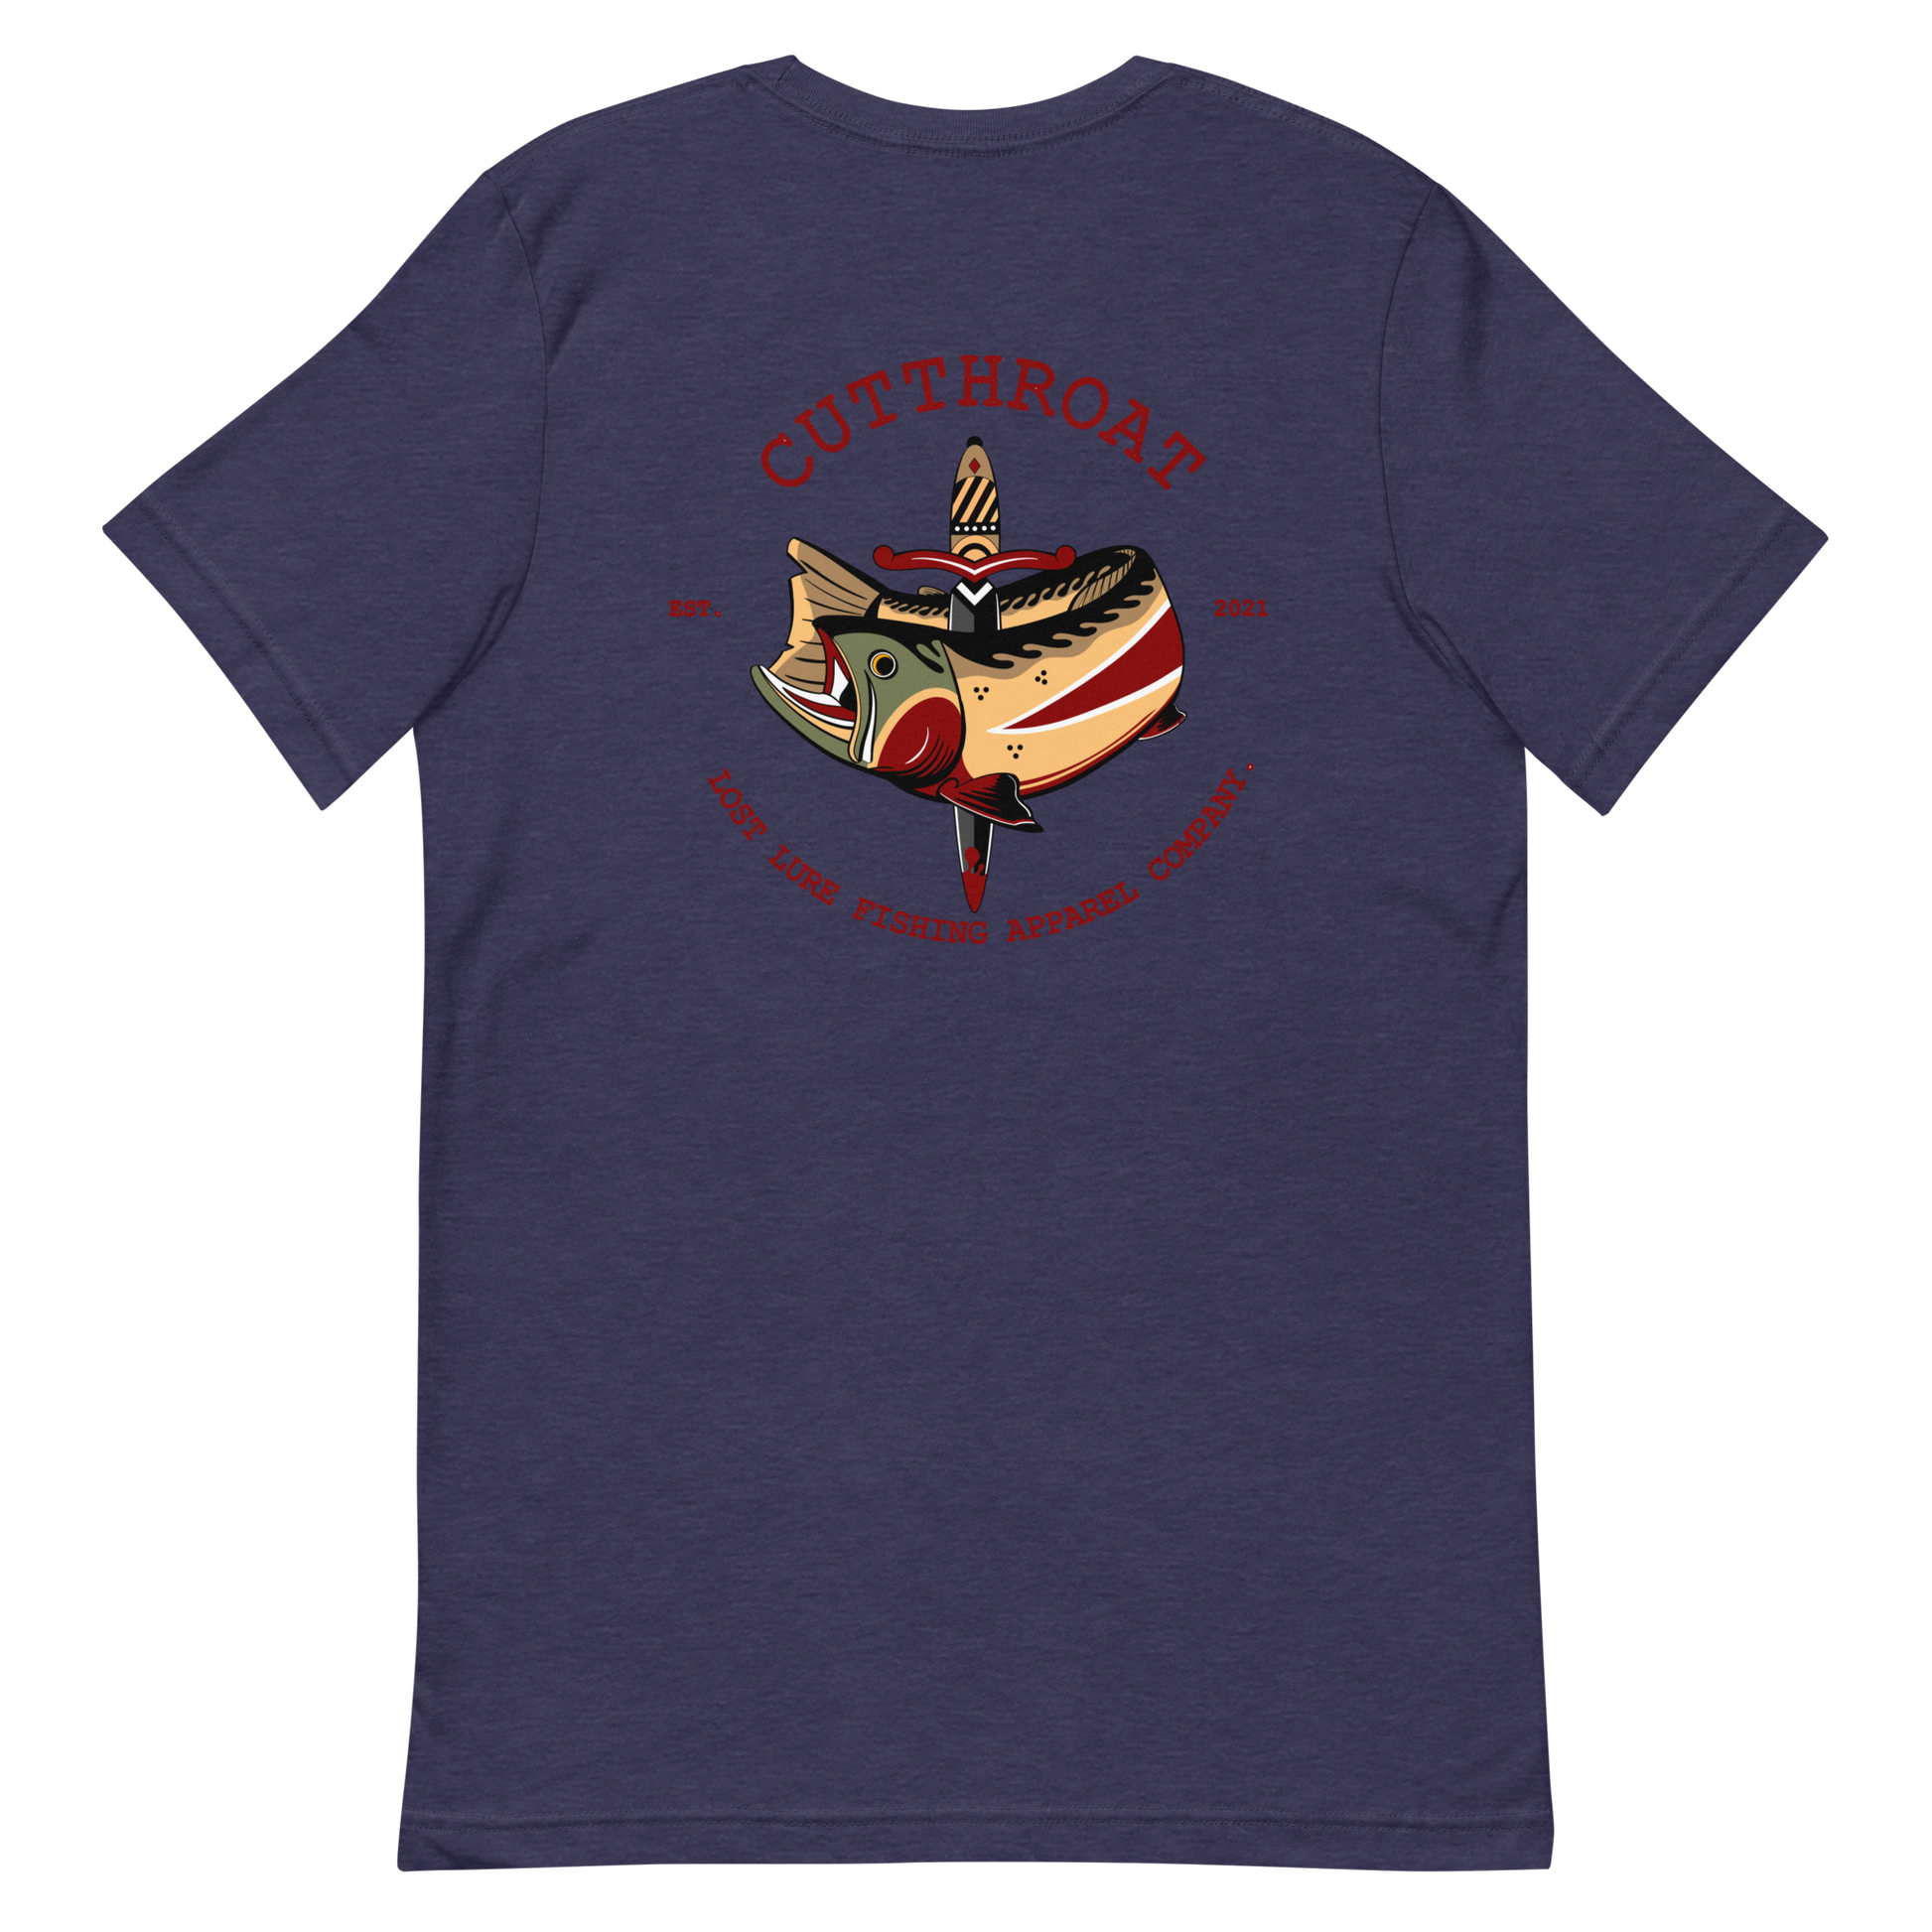 Cutthroat Trout fishing shirt. It’s an American traditional style design with a cutthroat trout and a dagger. The shirt reads Cutthroat trout, est. 2021, lost lure fishing apparel company. The front of the shirt has the lost lure logo. Navy fishing shirt, back side